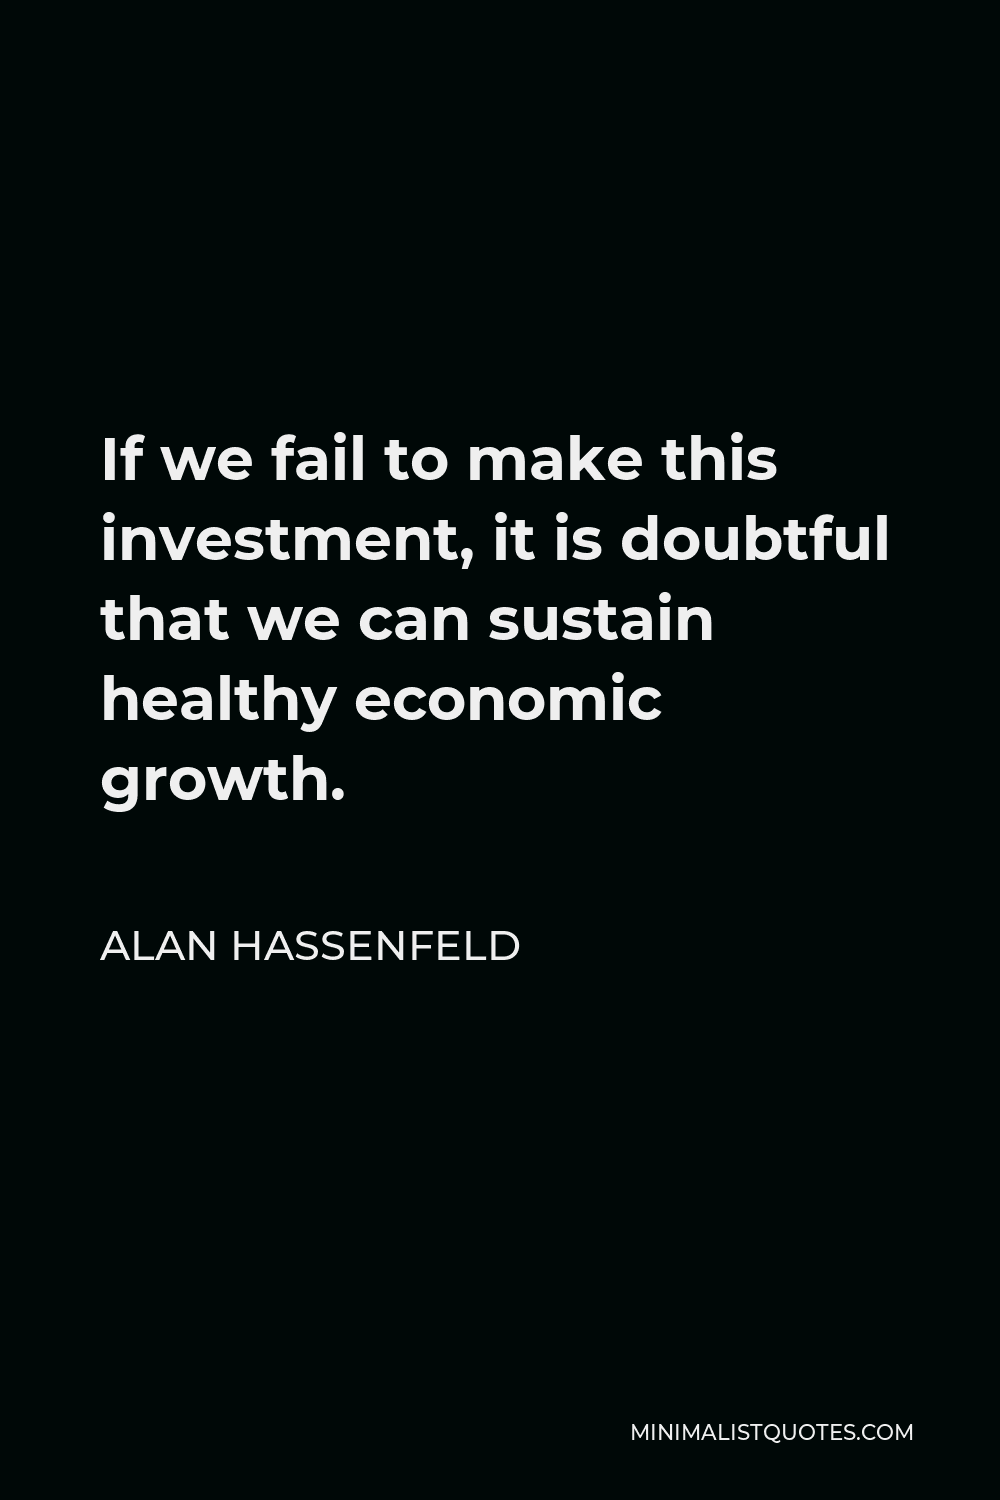 Alan Hassenfeld Quote - If we fail to make this investment, it is doubtful that we can sustain healthy economic growth.